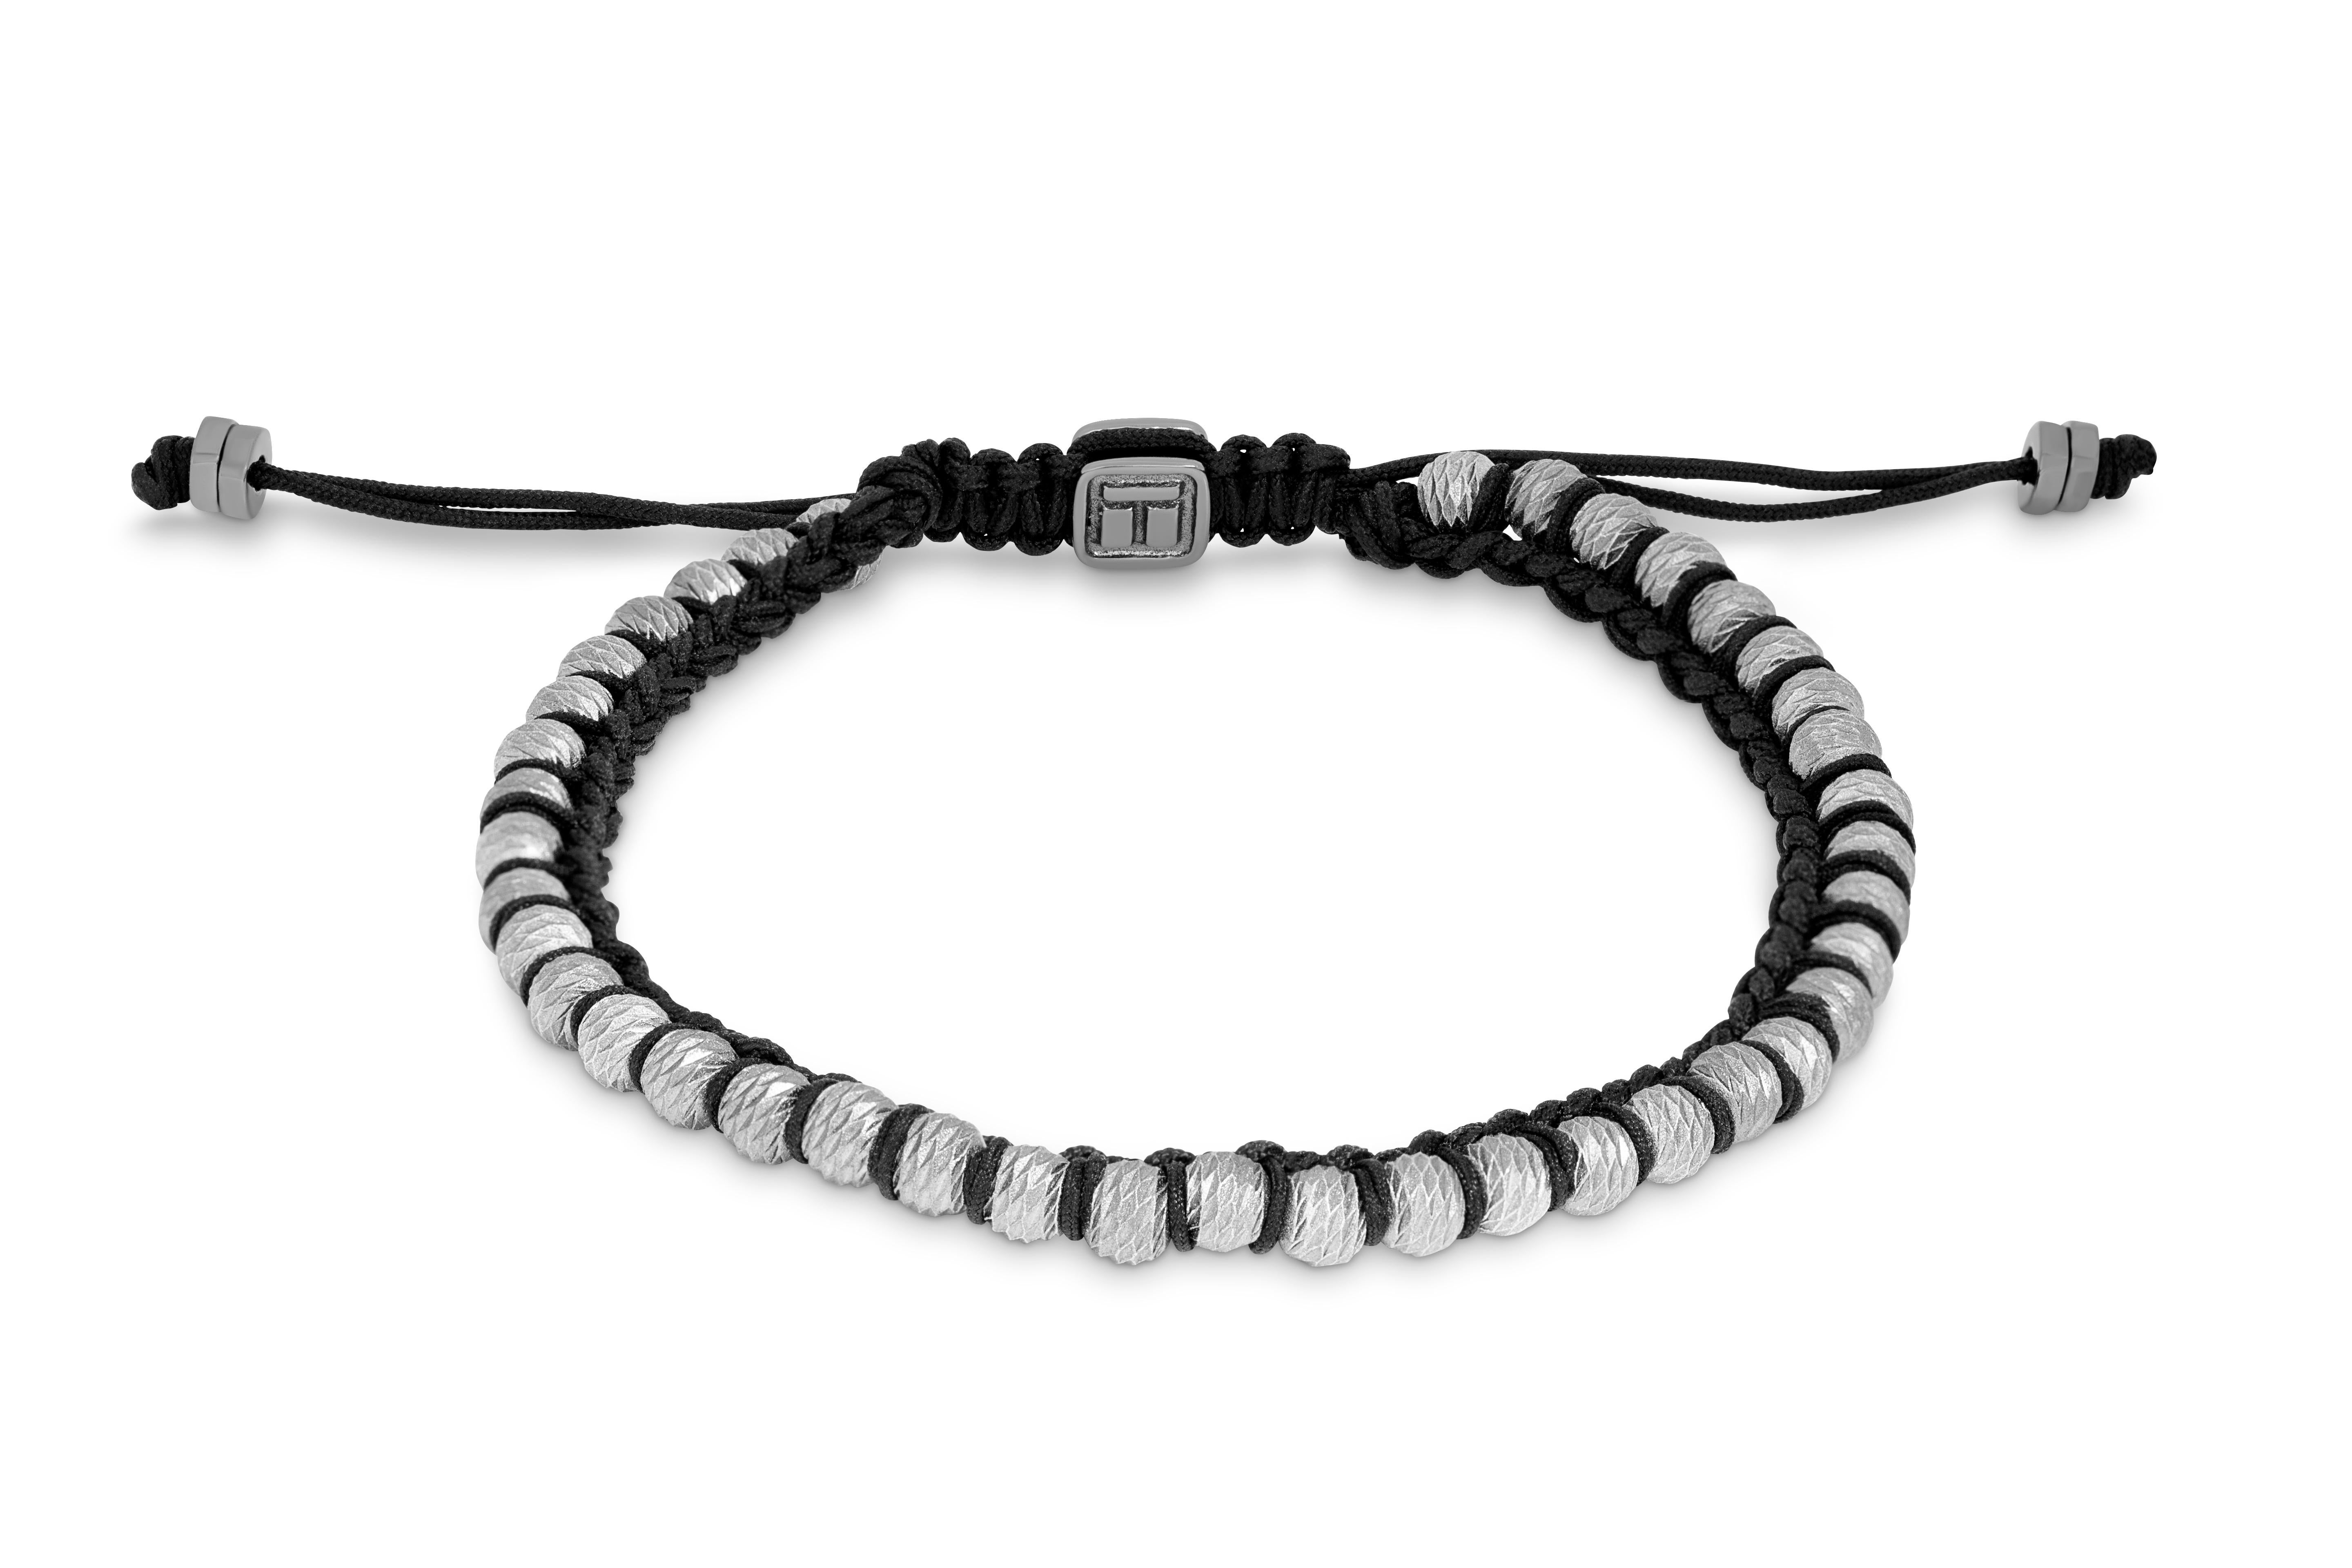 Sennit Classico Bracelet in Macrame with Rhodium-Plated Sterling Silver, Size M

This sleek and versatile macrame bracelet is made from a unique macrame braiding combined with textured round silver beads. Each bracelet takes around an hour and a